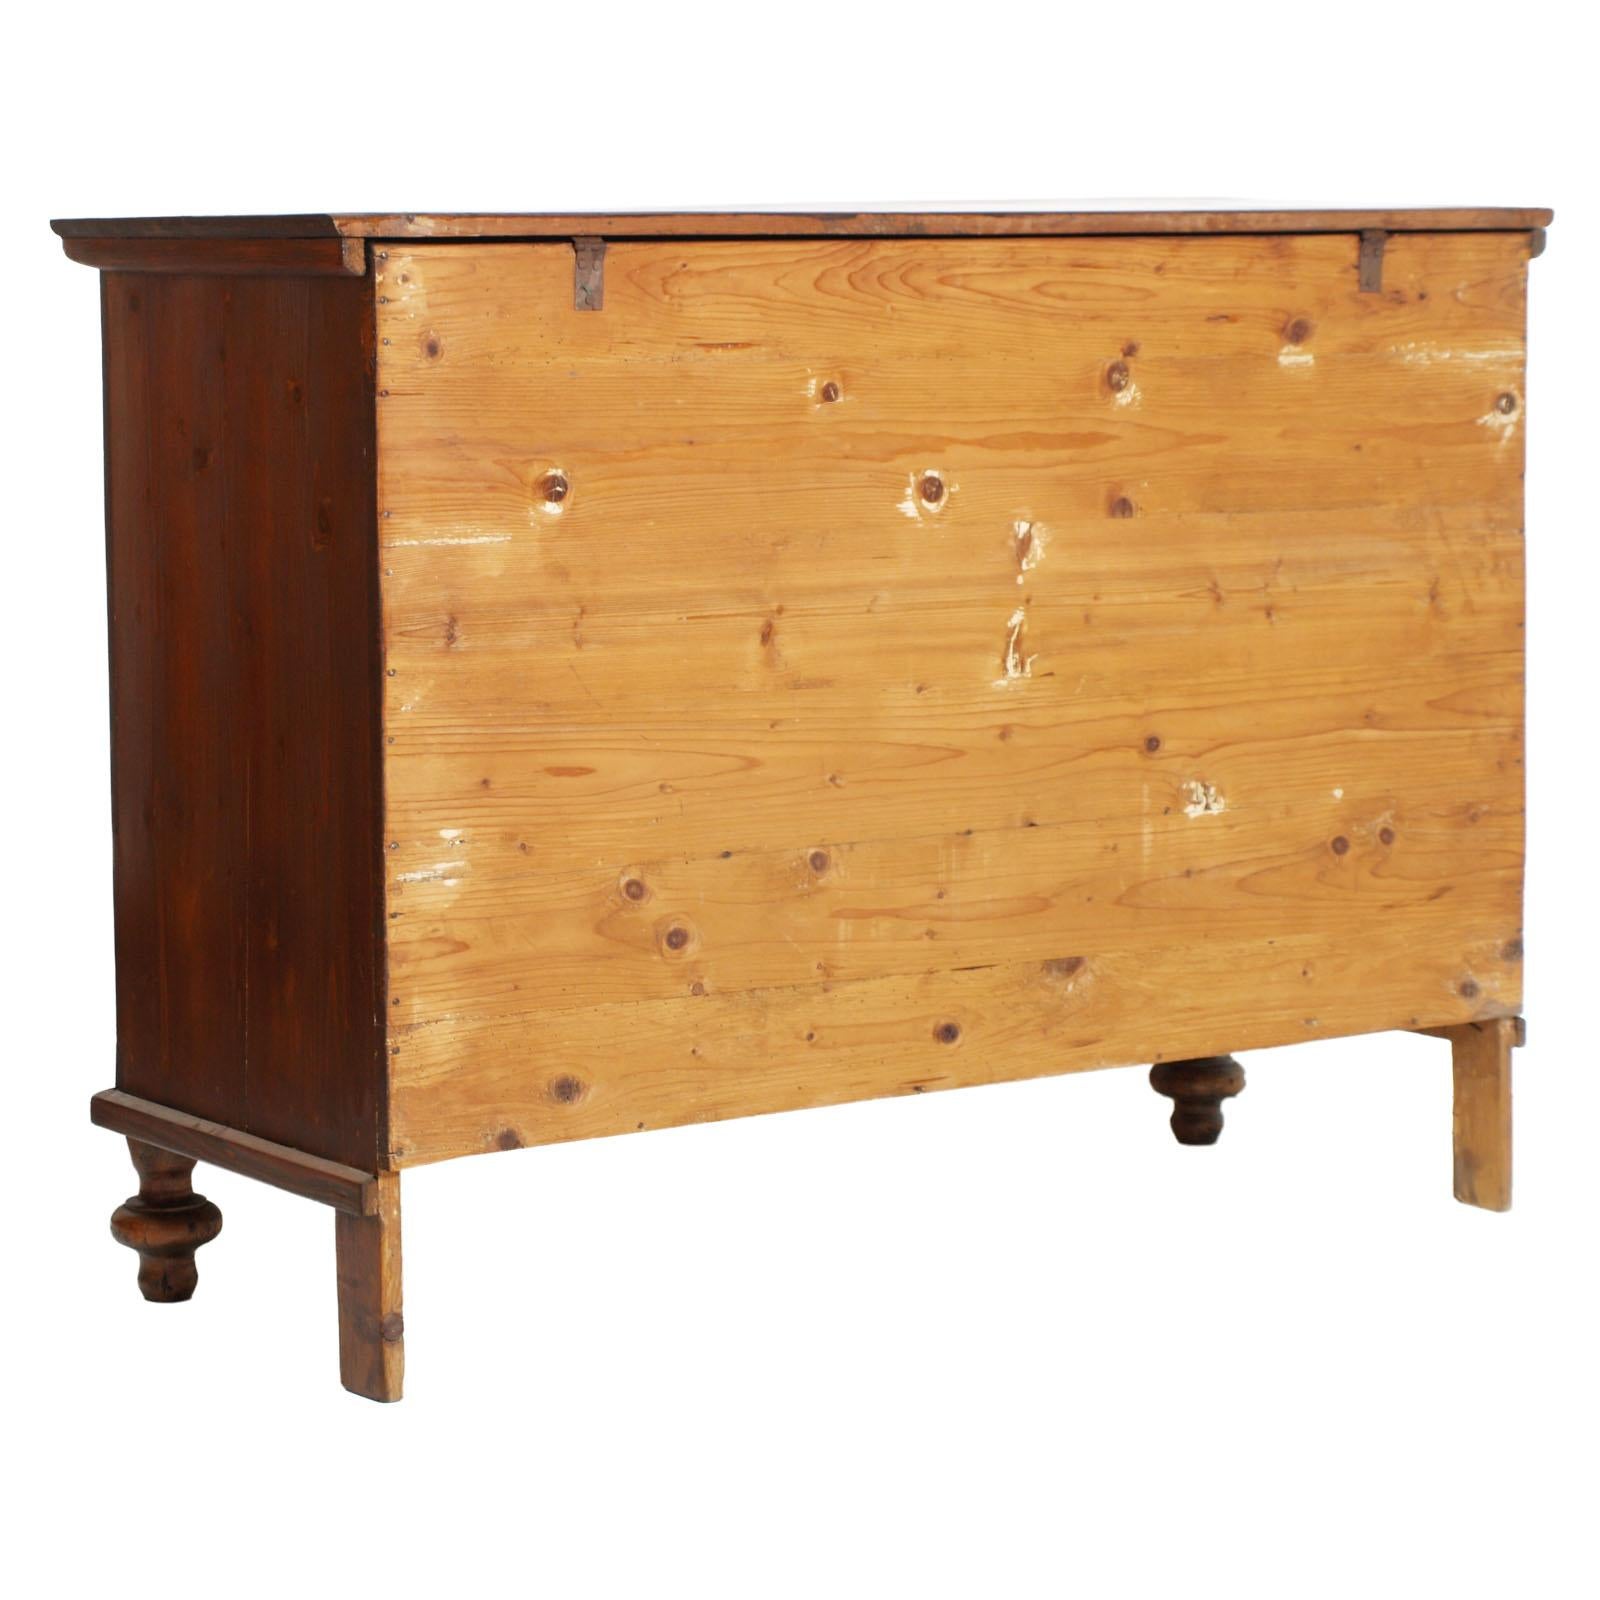 19th Century, Country Sideboard with Drover, in massive wood, Wax Polished For Sale 3